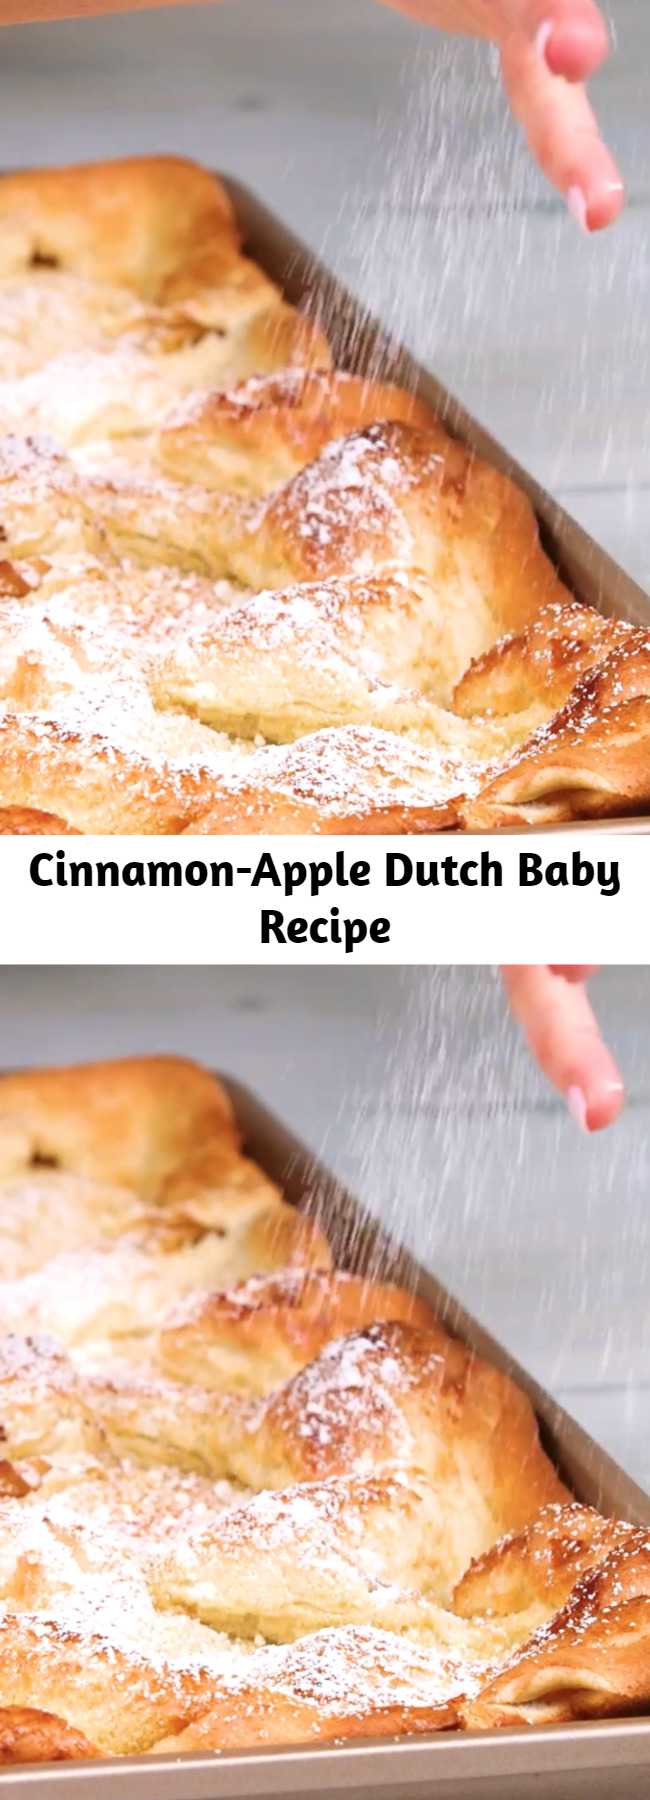 Cinnamon-Apple Dutch Baby Recipe - This sheet pan Dutch baby is a perfect dish to whip up for a group brunch, but can easily be transformed into dessert when served with a scoop of vanilla ice cream. 